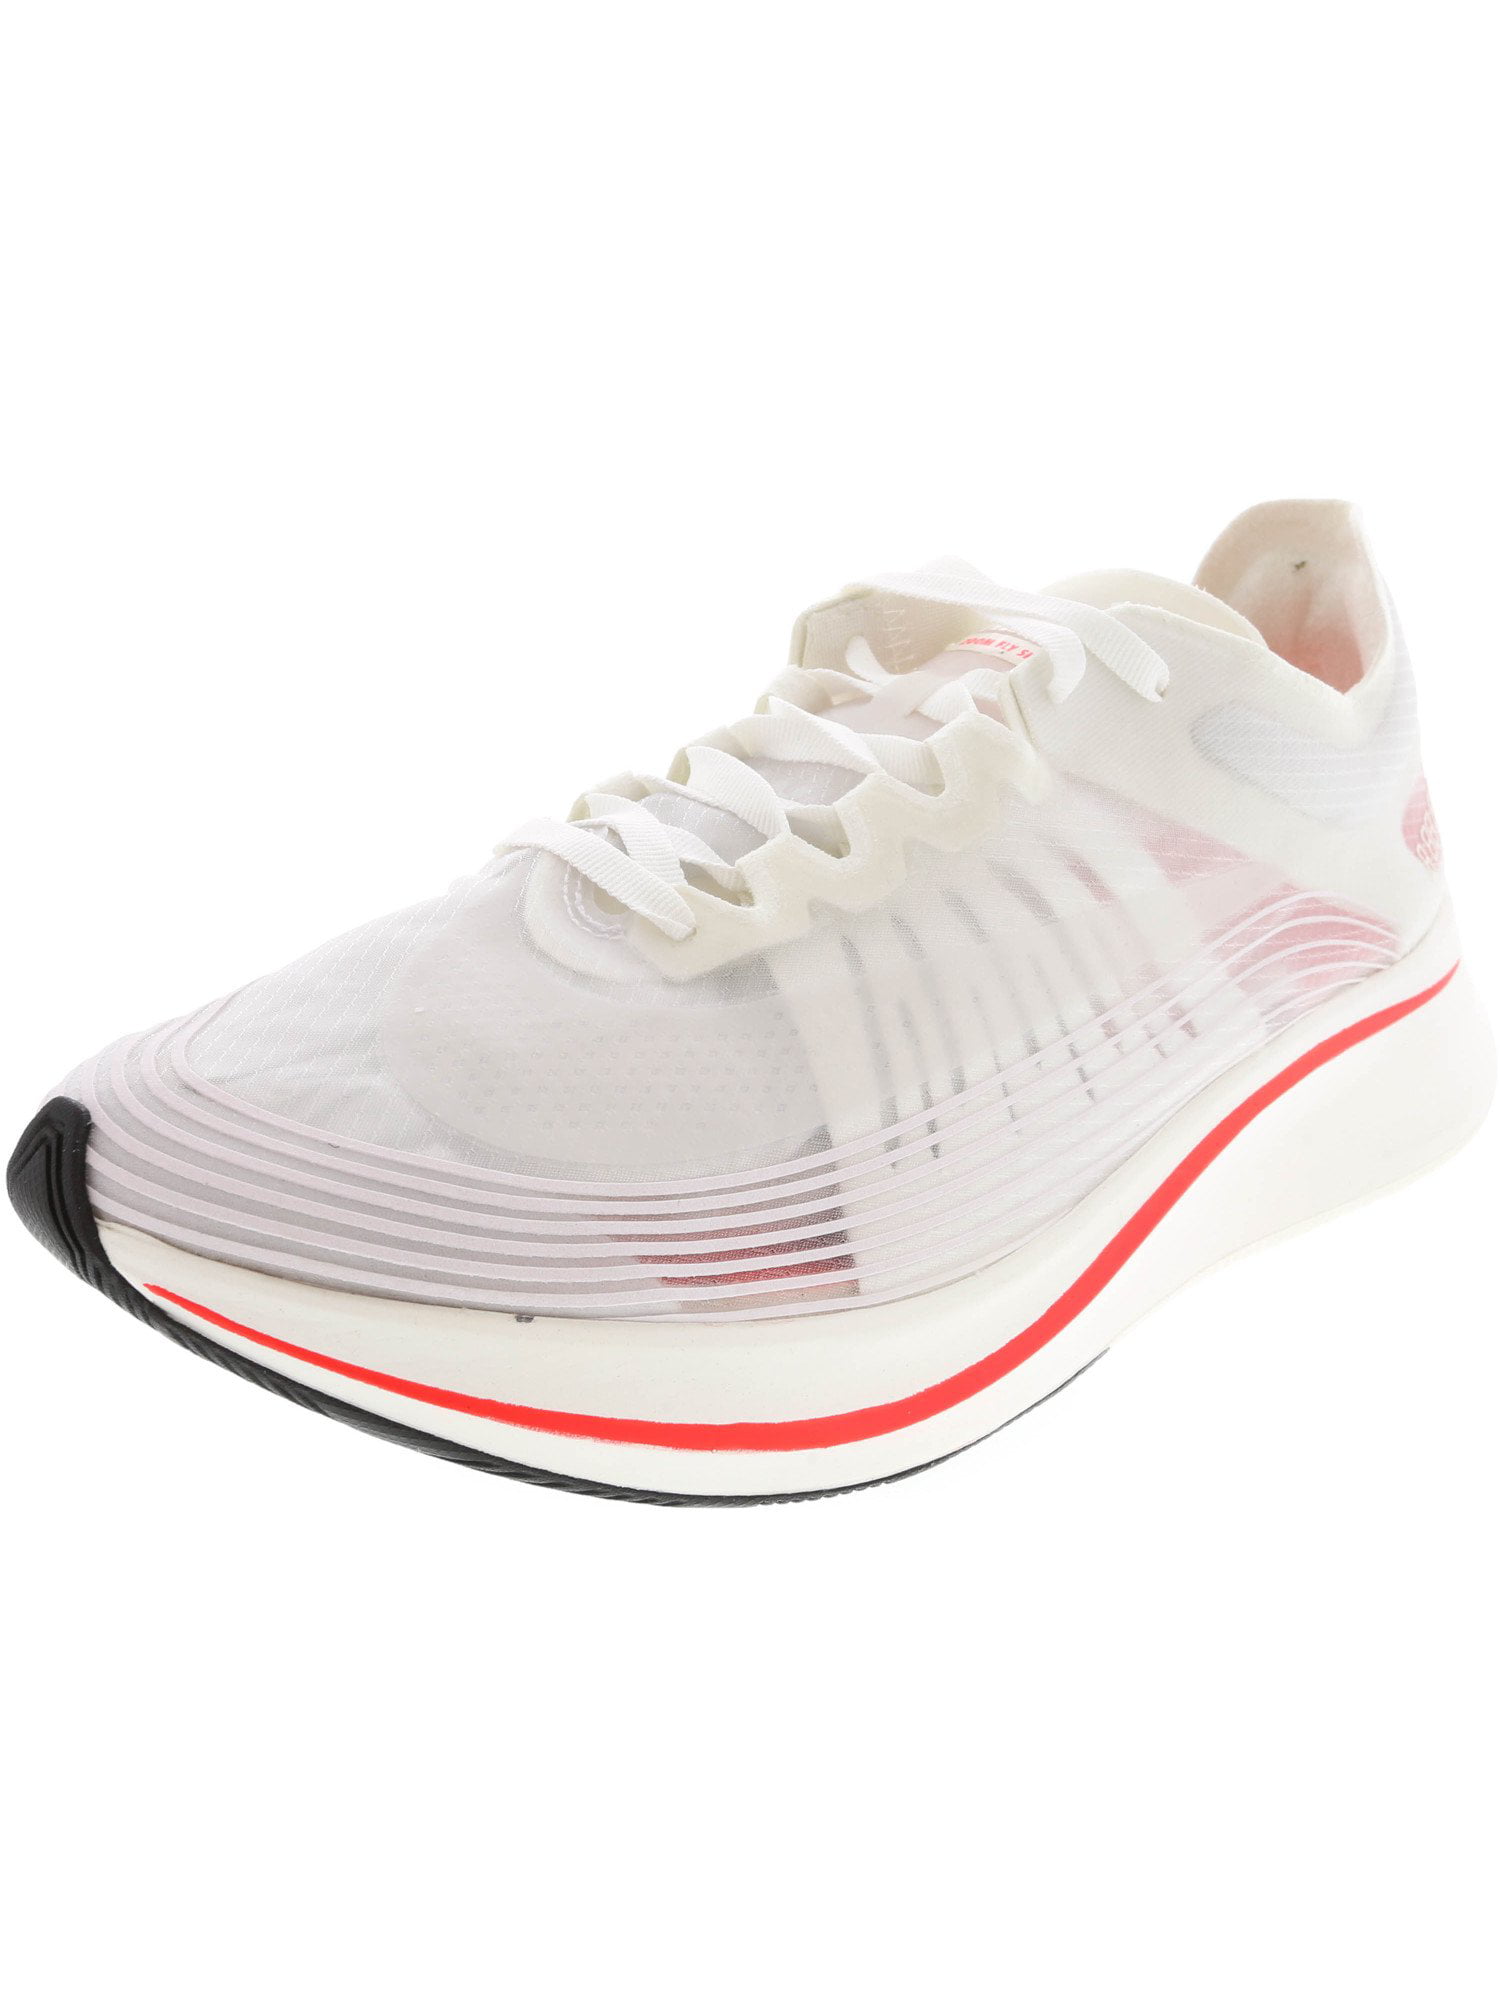 zoom fly sp 10.5